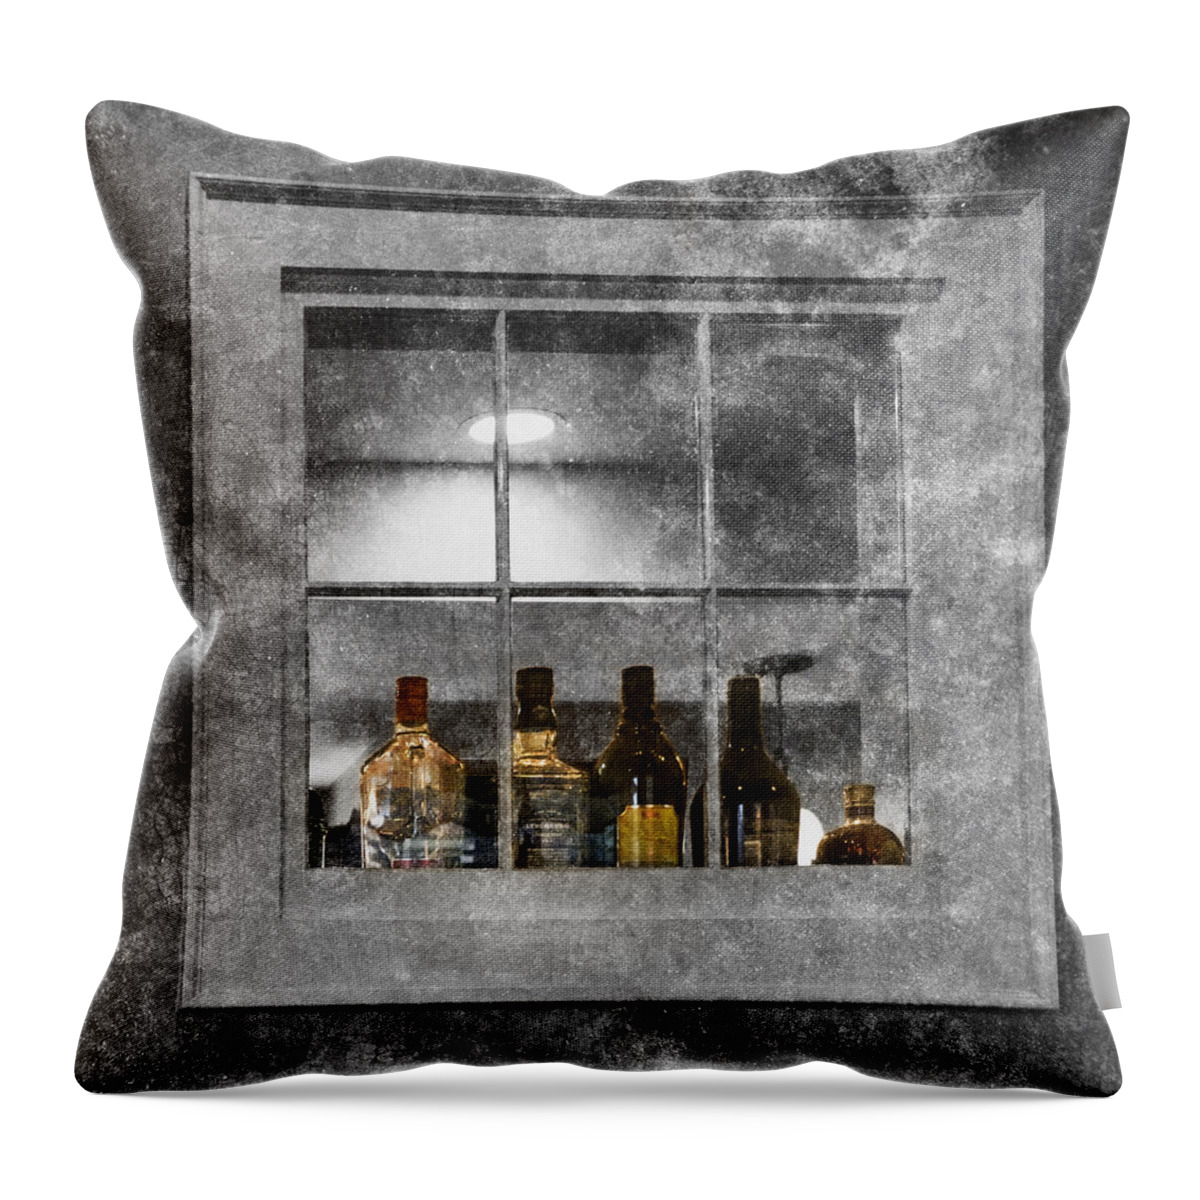 Wilmington Vermont Throw Pillow featuring the photograph Colored Bottles In Window by Tom Singleton